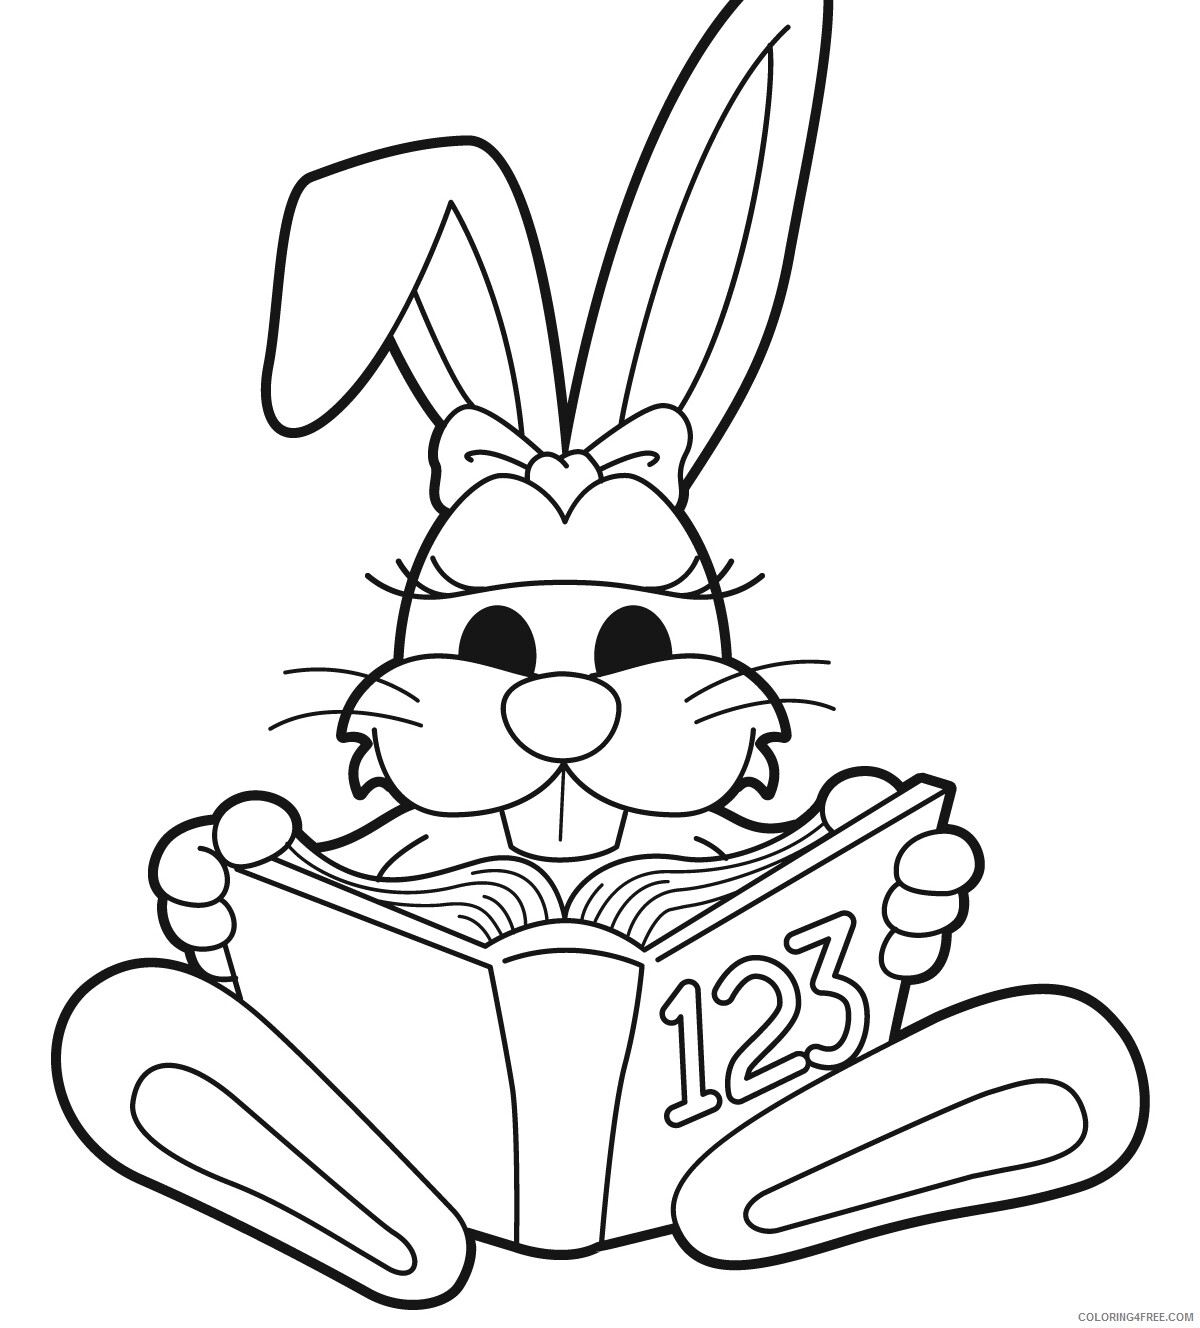 Math Coloring Pages Educational math bunny Printable 2020 1719 Coloring4free